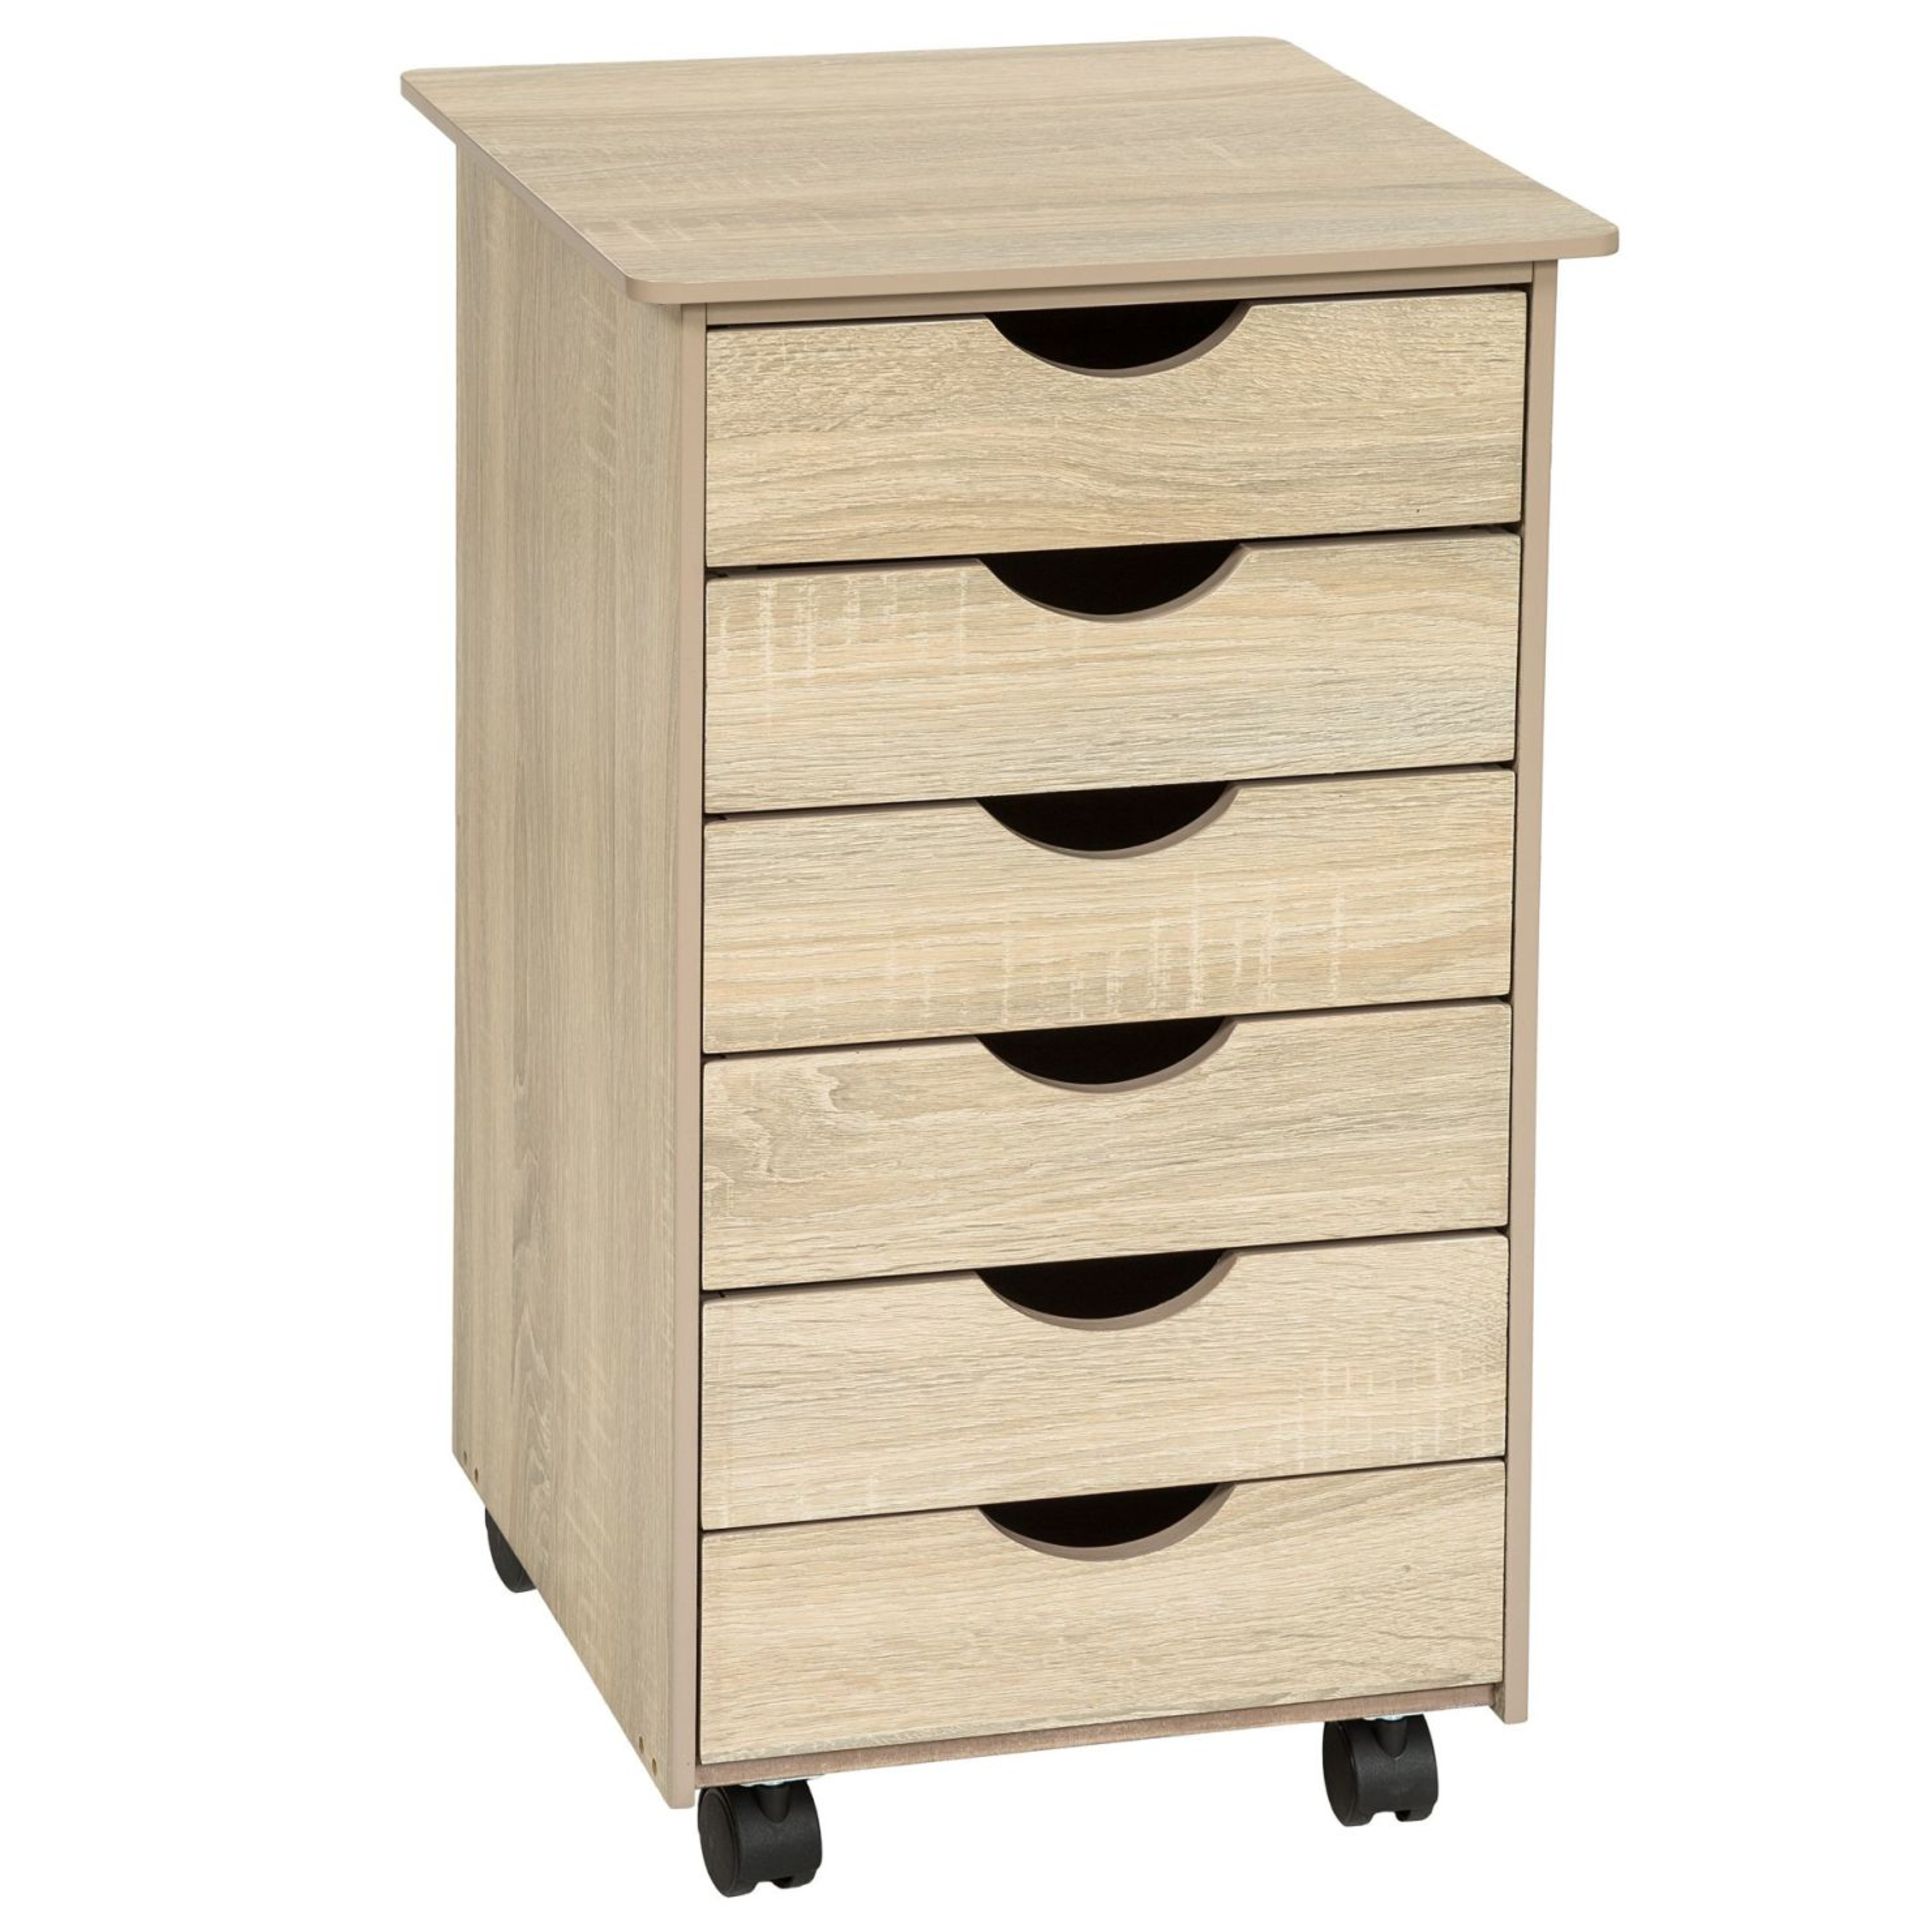 Tectake - Filing Cabinet On Wheels With 6 Drawers Light Oak - Boxed. RRP £53.99 - Image 2 of 2